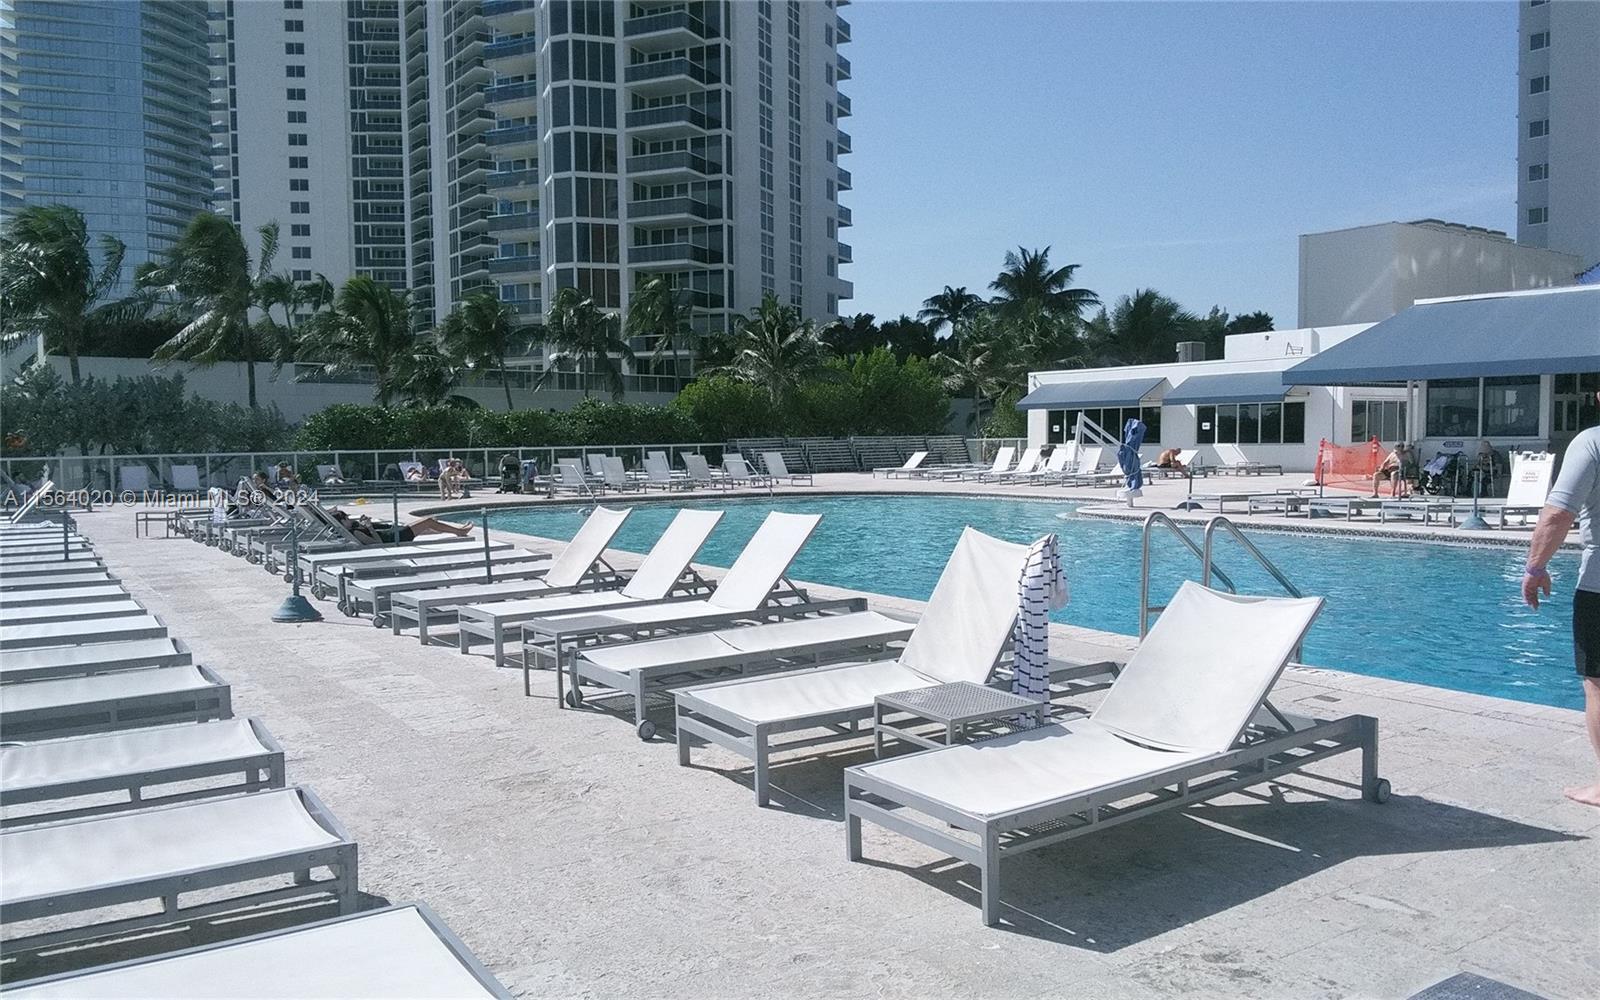 Photo of 19201 Collins Ave #733 in Sunny Isles Beach, FL